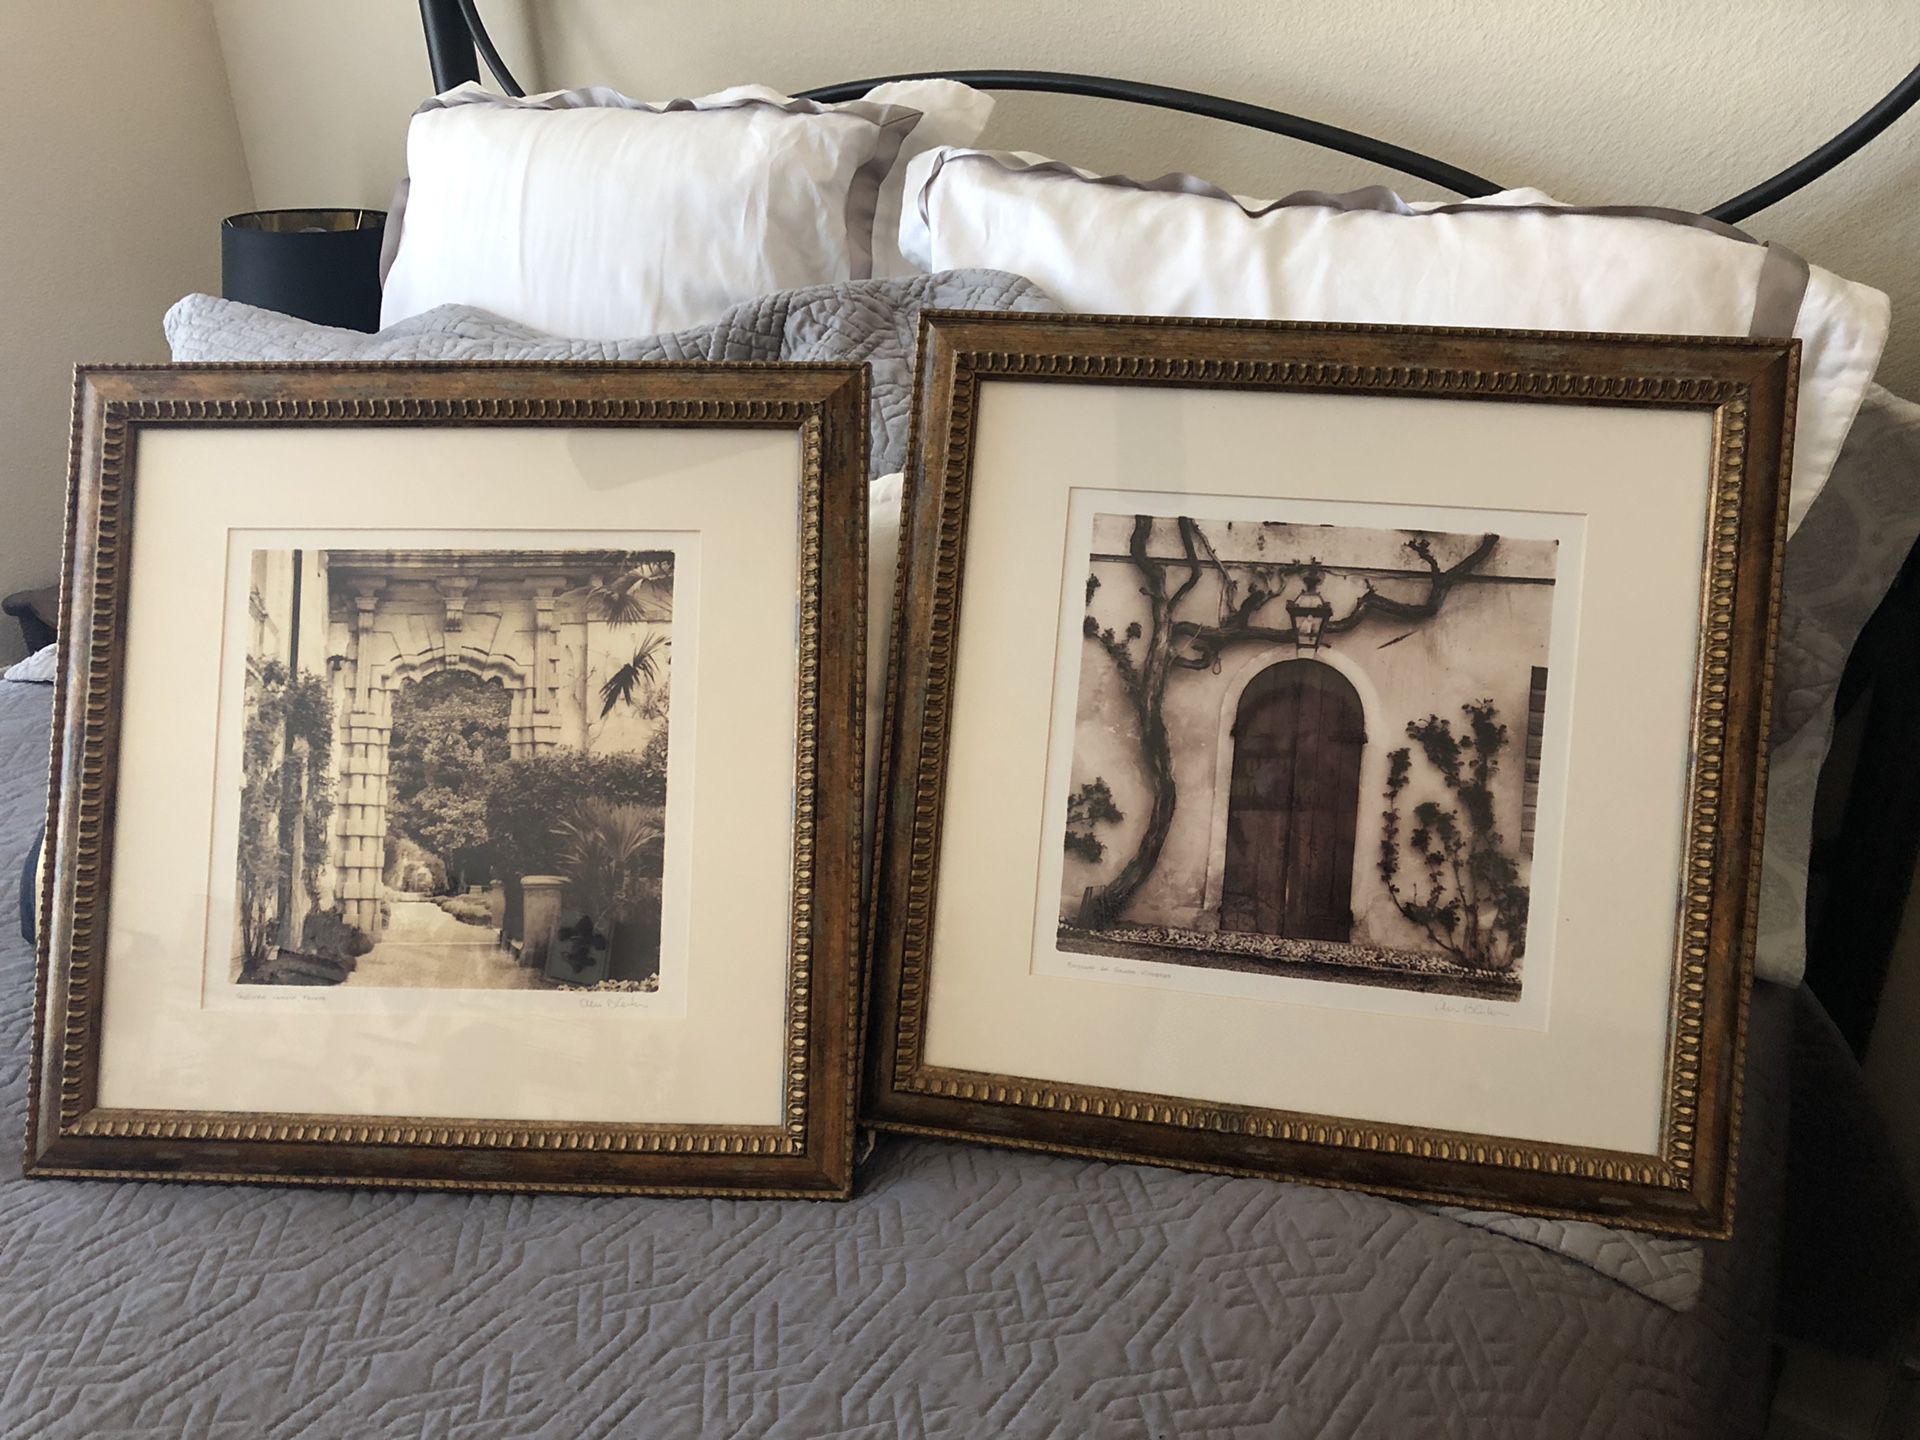 Wall art. Framed prints. Architectural, rustic, nature, travel, inspired.